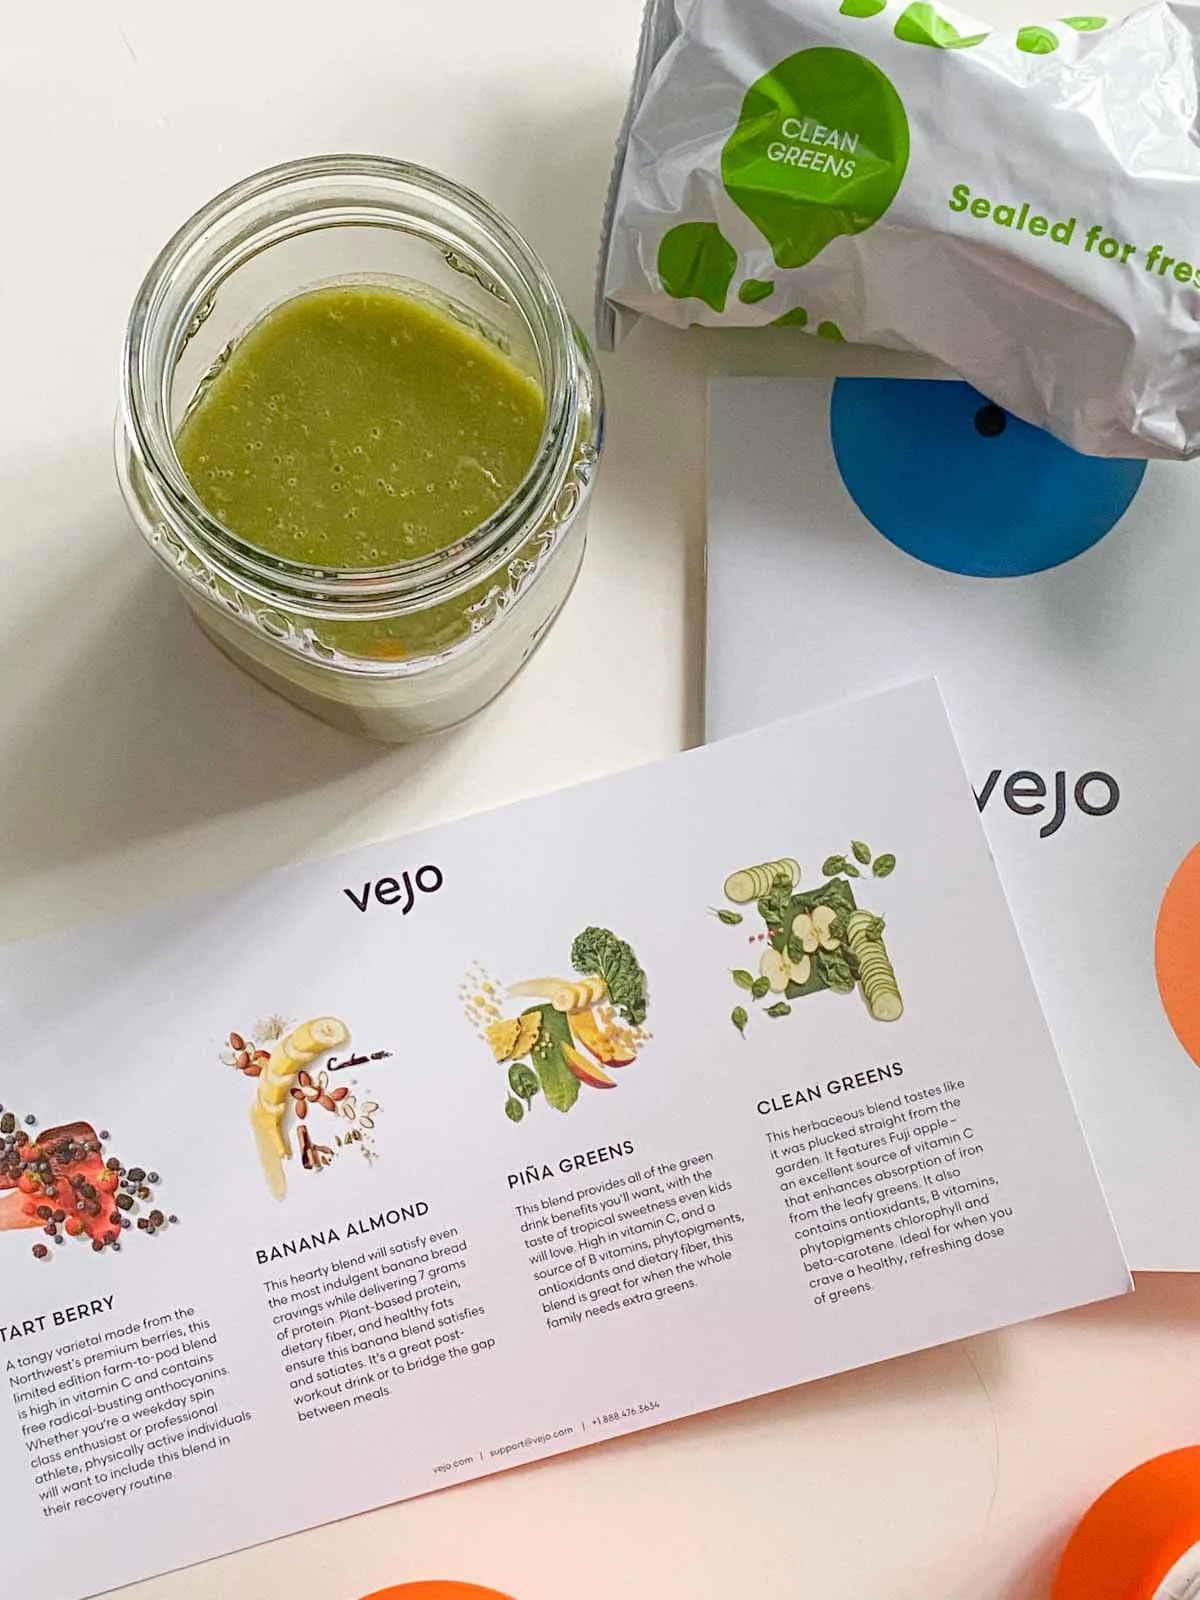 Clean green iuice with vejo info facts card - vejo review